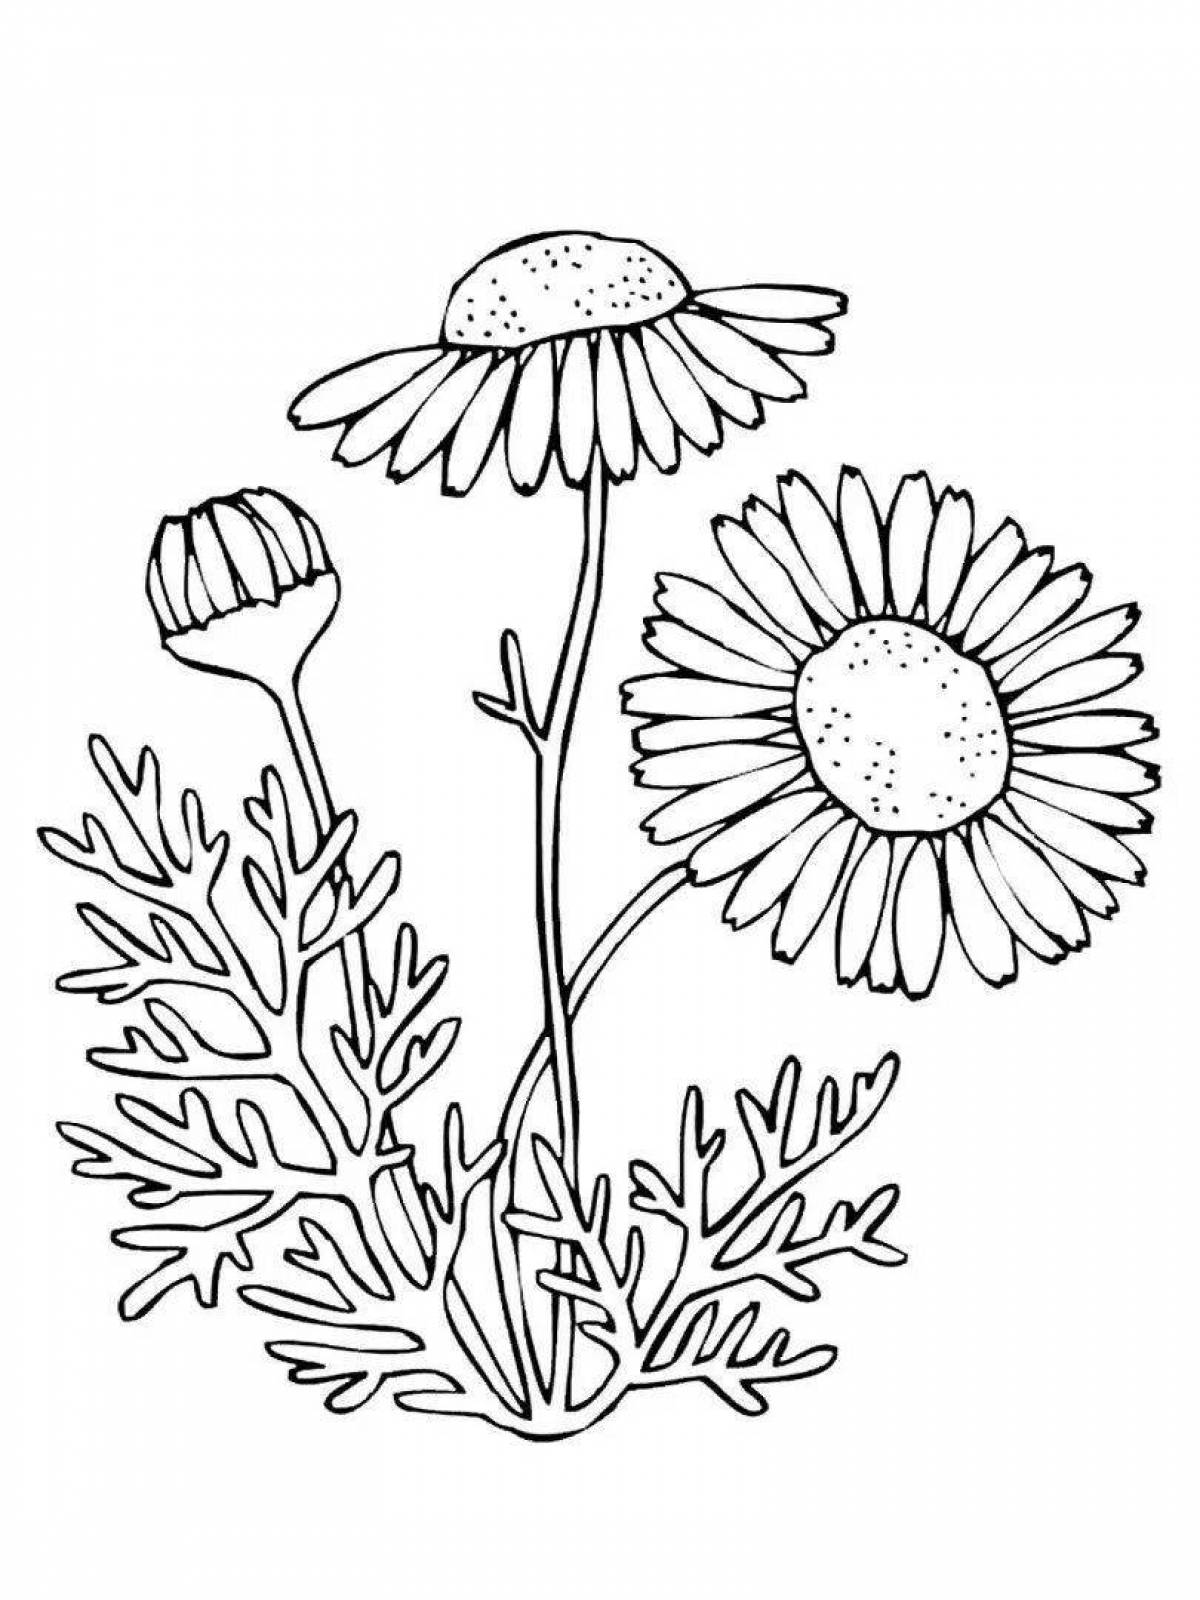 Awesome chamomile coloring book